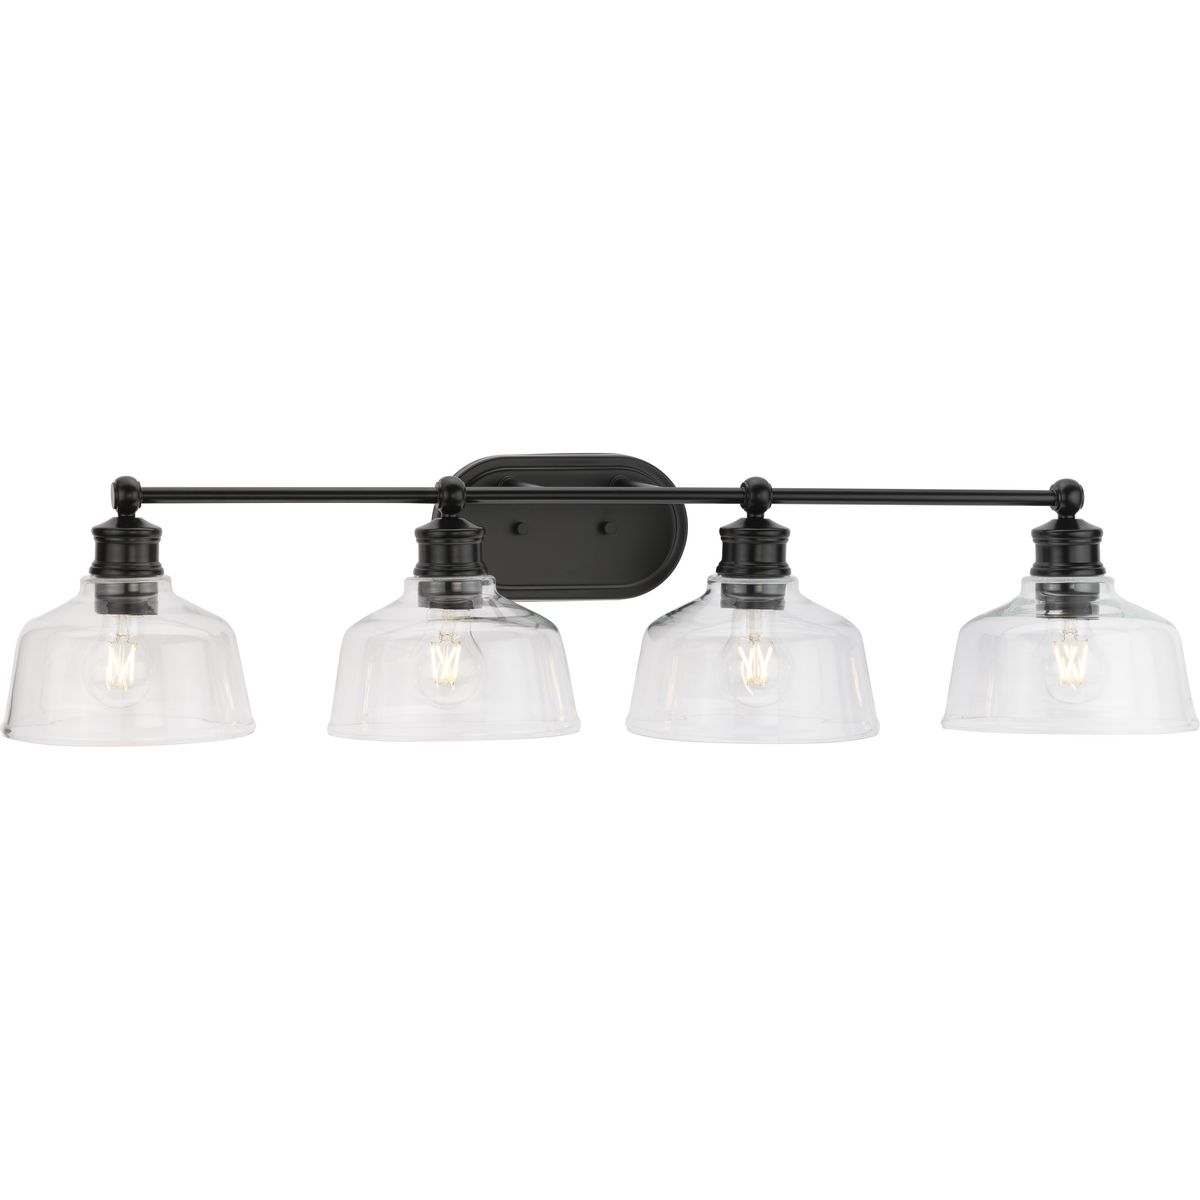 Singleton Collection Four-Light 36" Matte Black Farmhouse Vanity Light with Clear Glass Shades - Damp Location Listed